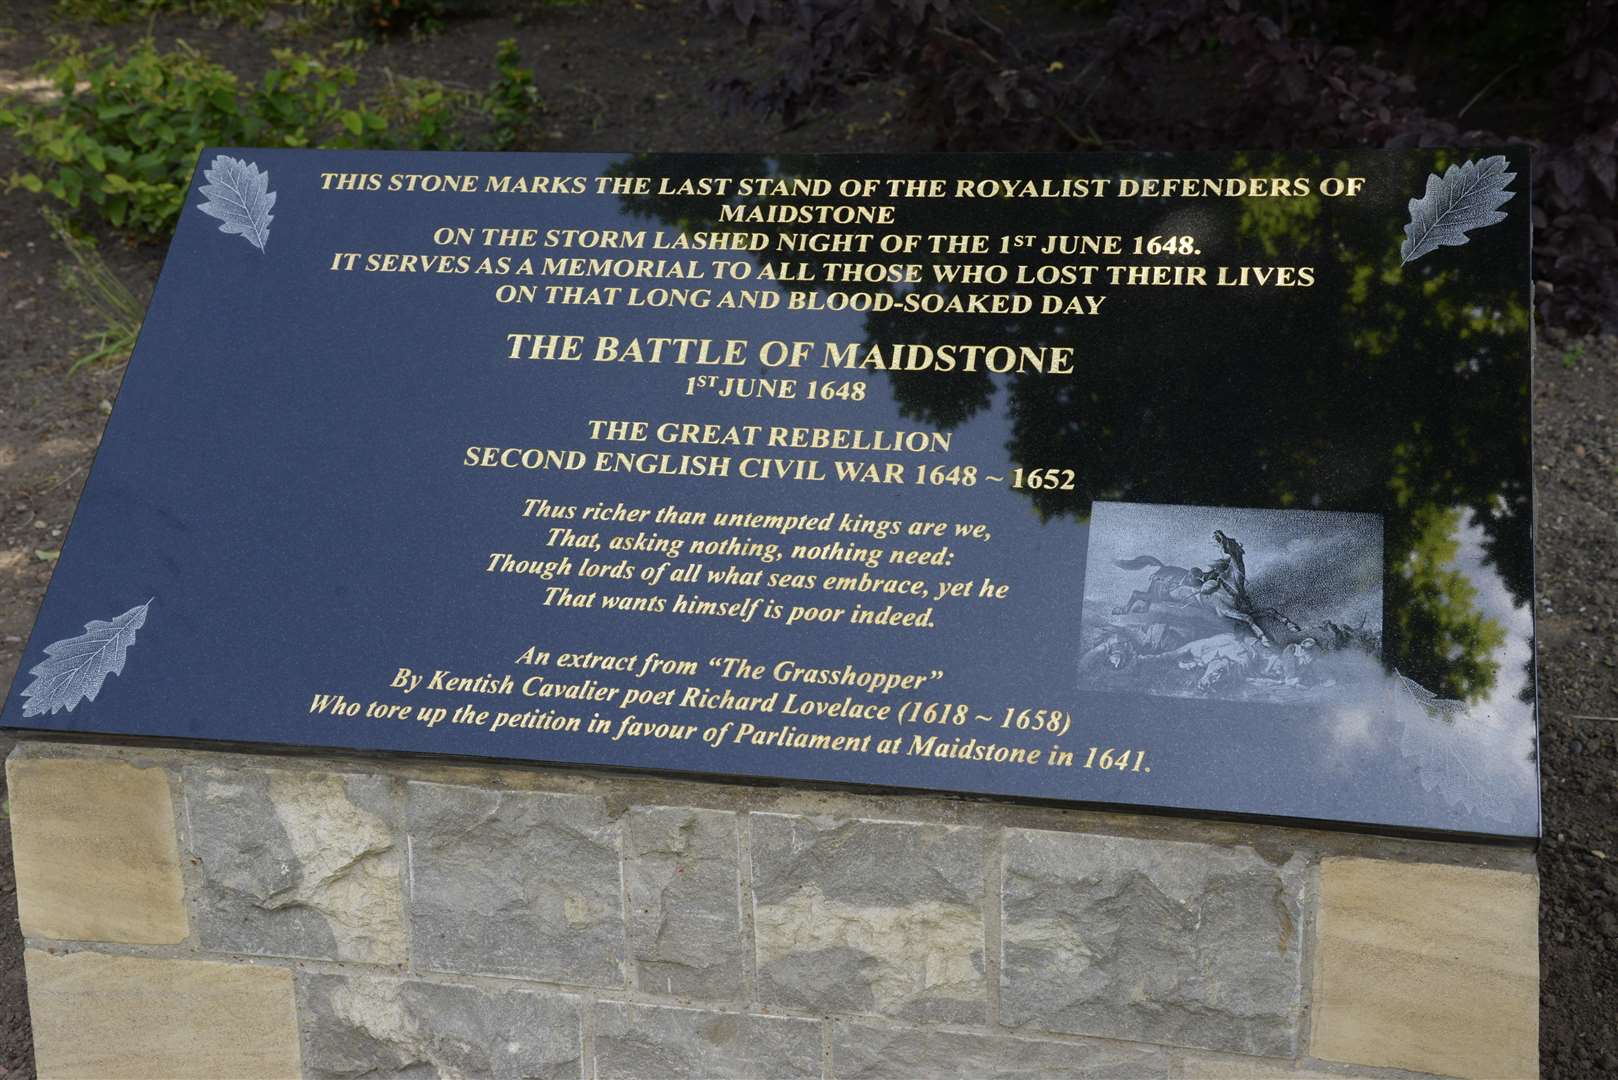 The Battle of Maidstone Memorial in Brenchley Gardens, Maidstone. Picture: Chris Davey FM4794977 (2329493)